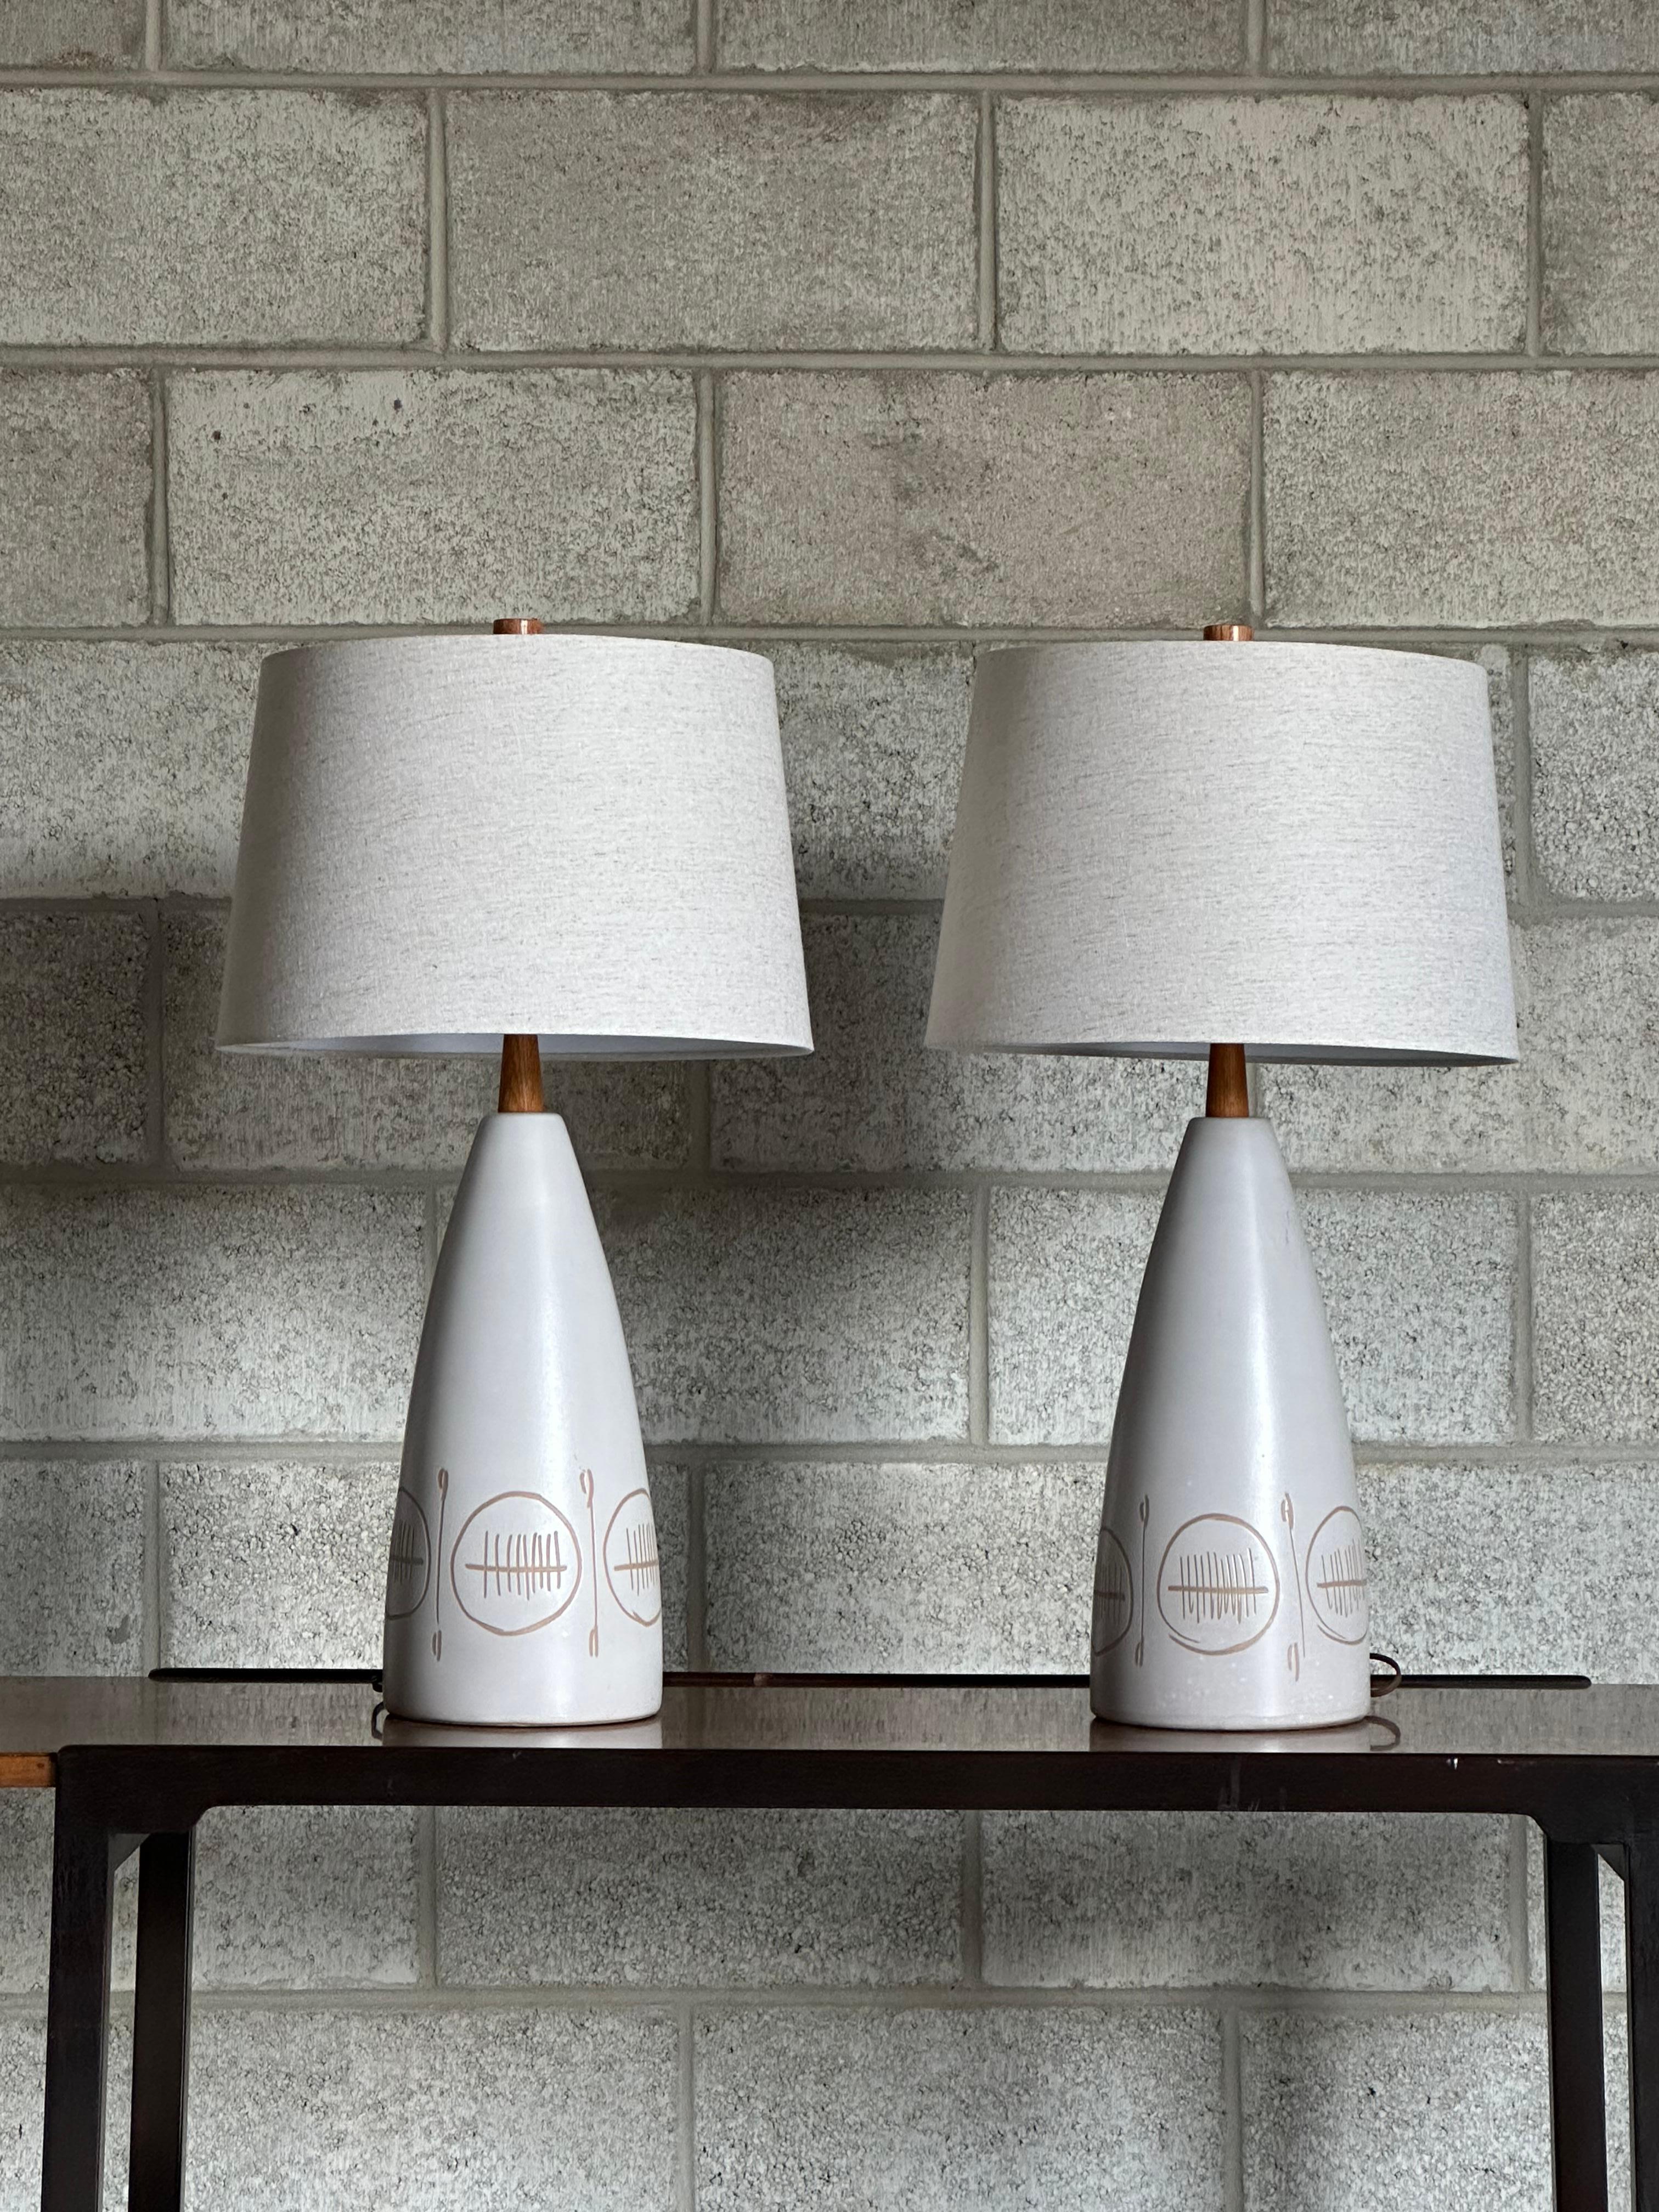 Pair of large table lamps designed by famed ceramicist duo Jane and Gordon Martz for Marshall Studios. Lamps feature a conical body with incised motif. Lamps are completed with oak necks and finials. Lamps present mostly off white with some faint